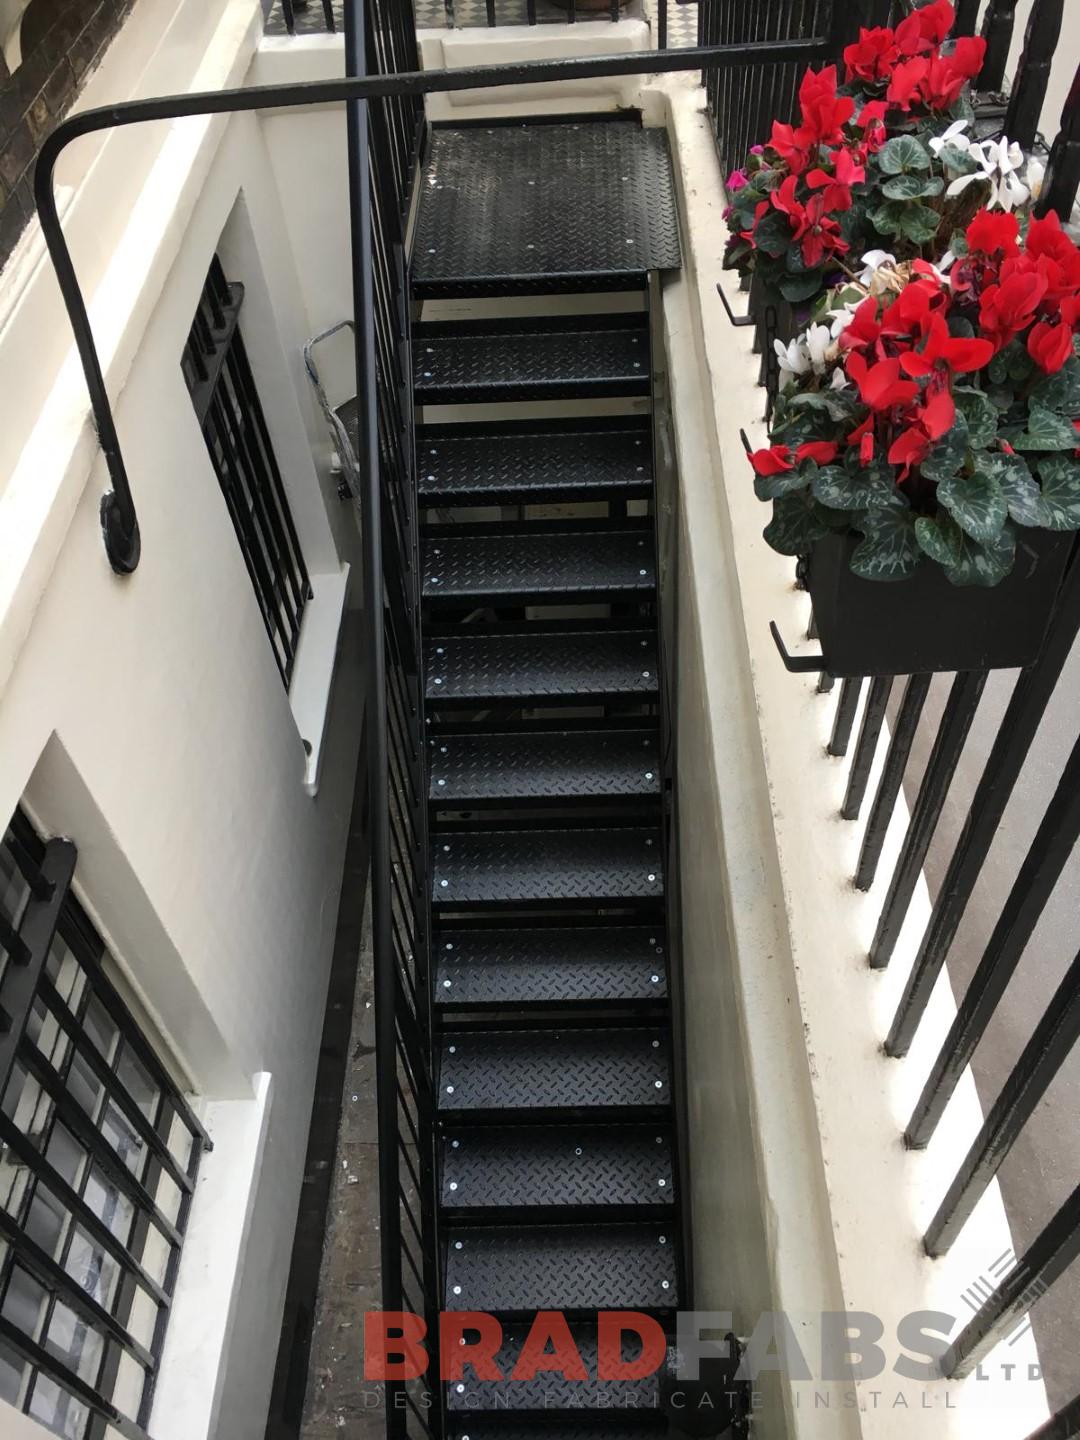 Fire escape manufactured, designed and installed by Bradfabs in London for a hotel